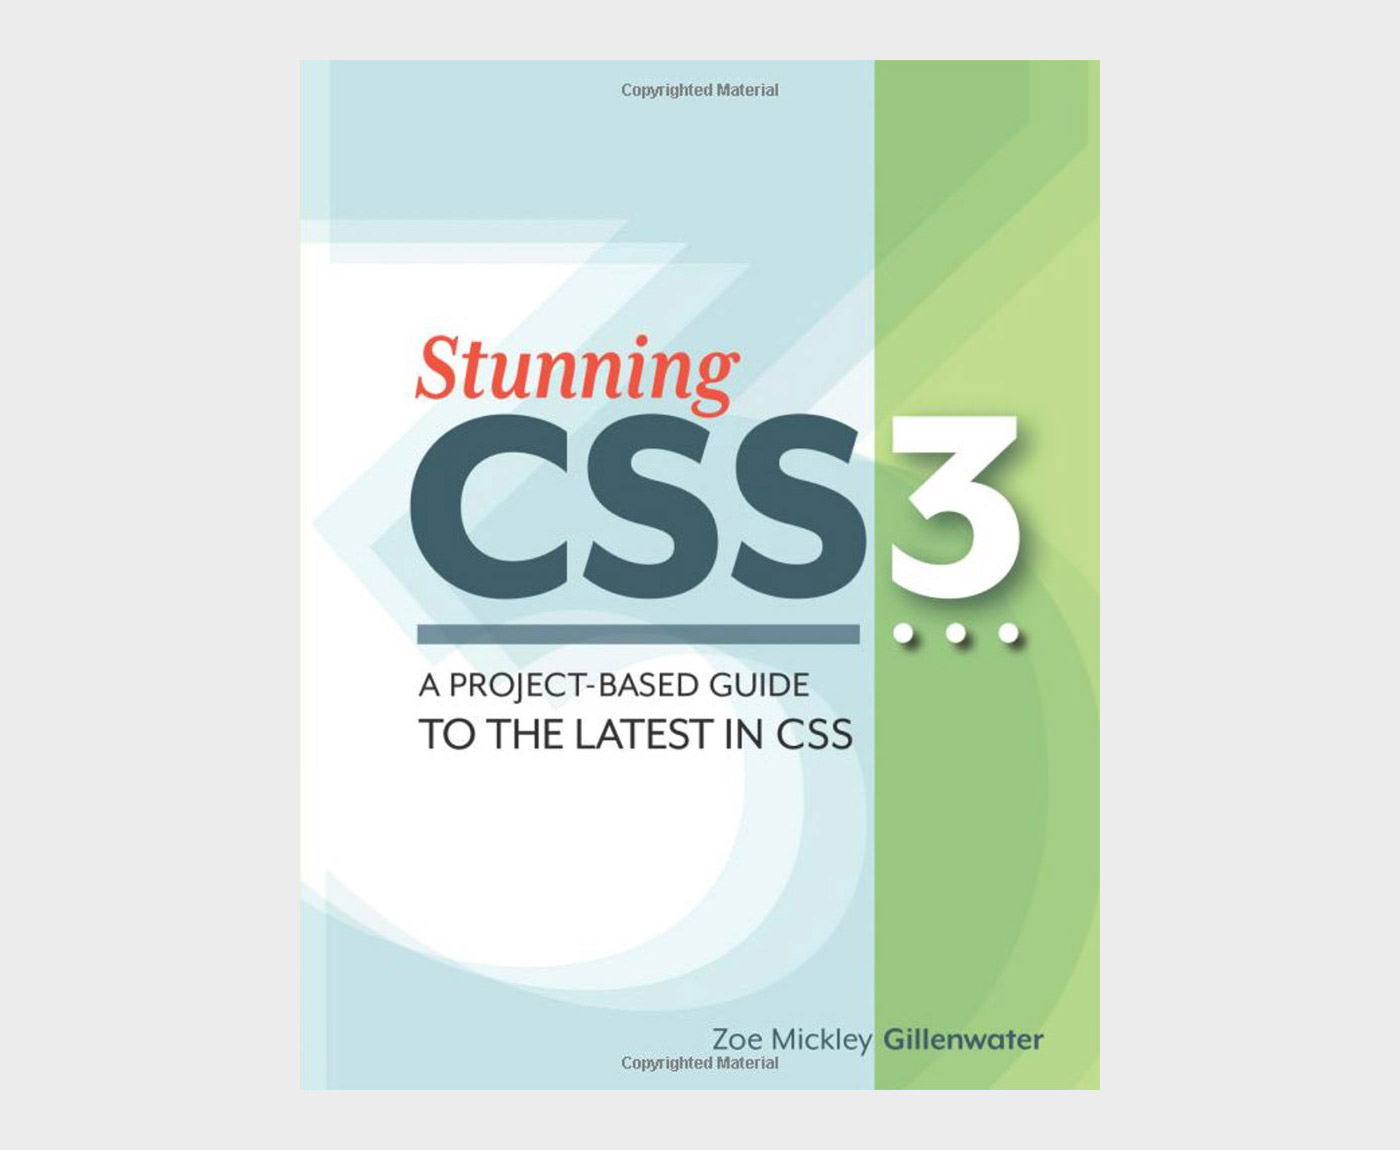 Stunning CSS3: A project-based guide to the latest in CSS